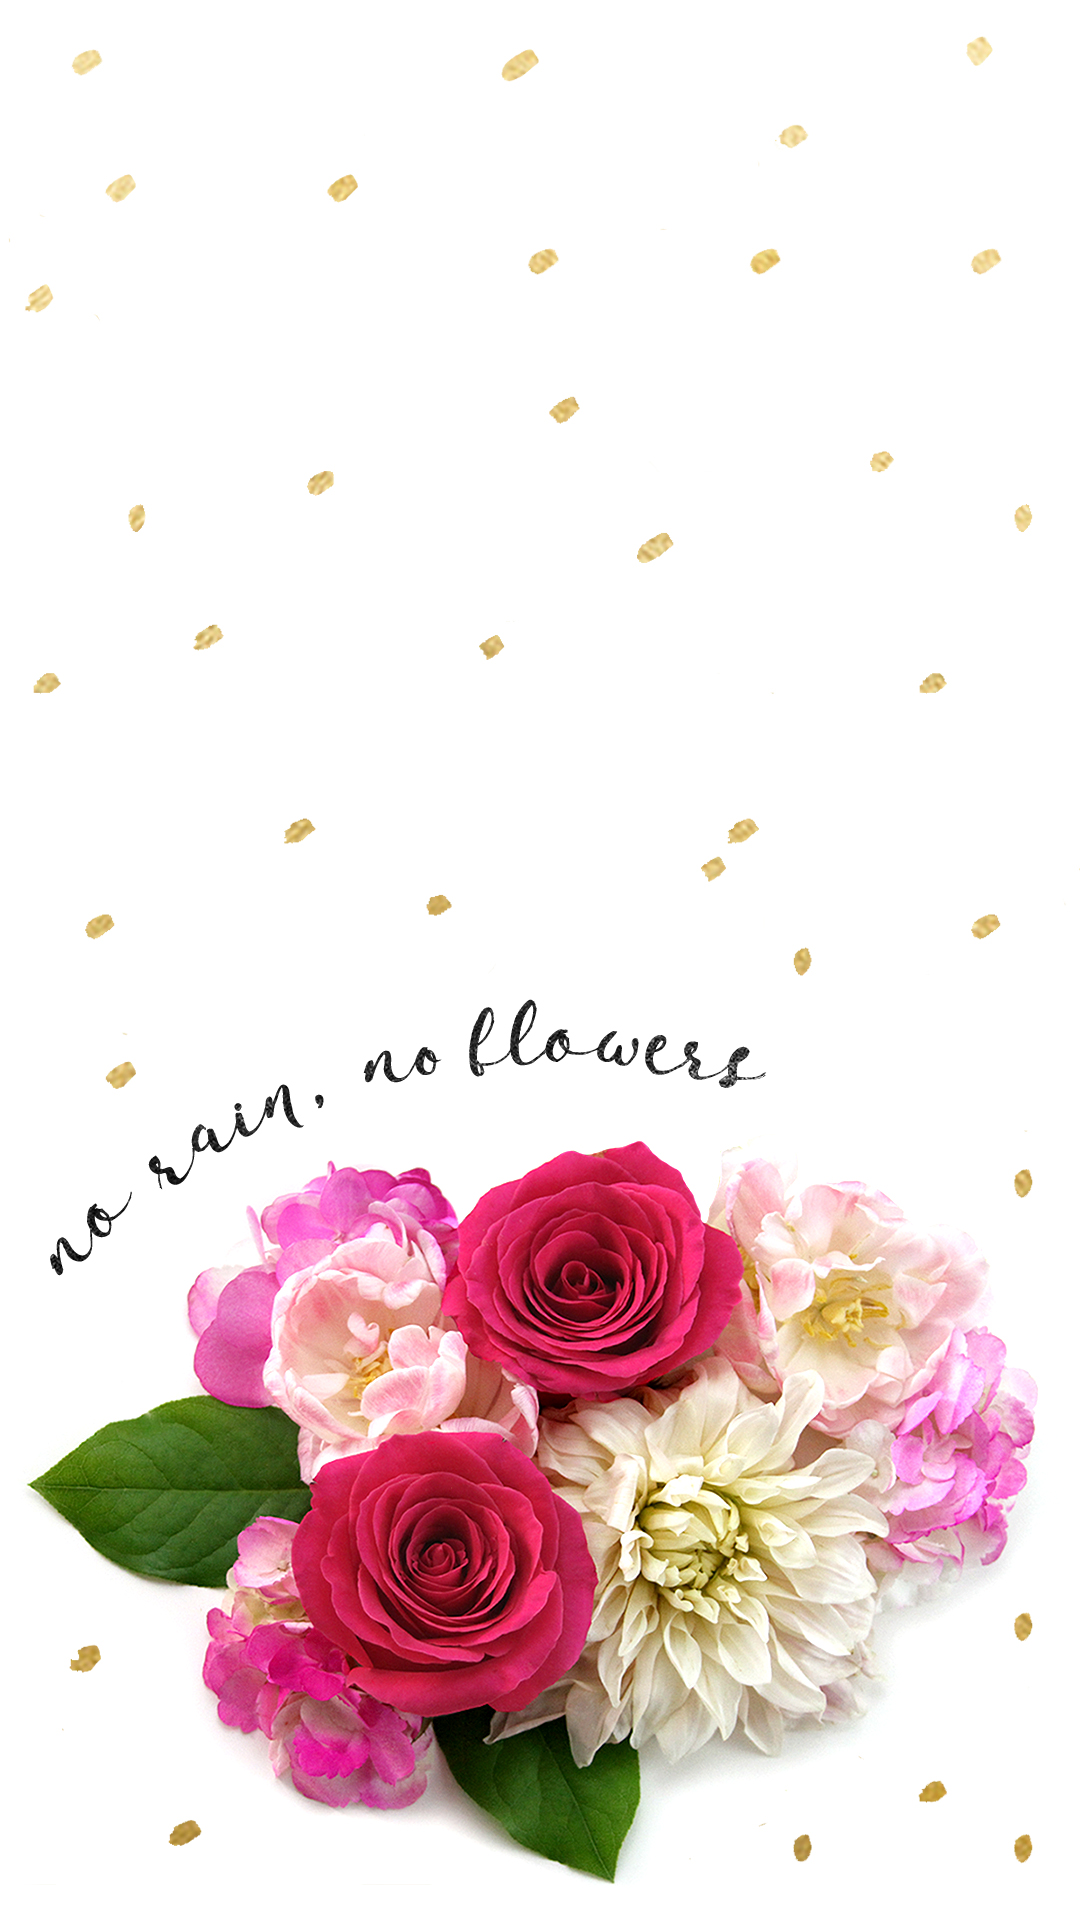 Rose Background To Celebrate Every Day